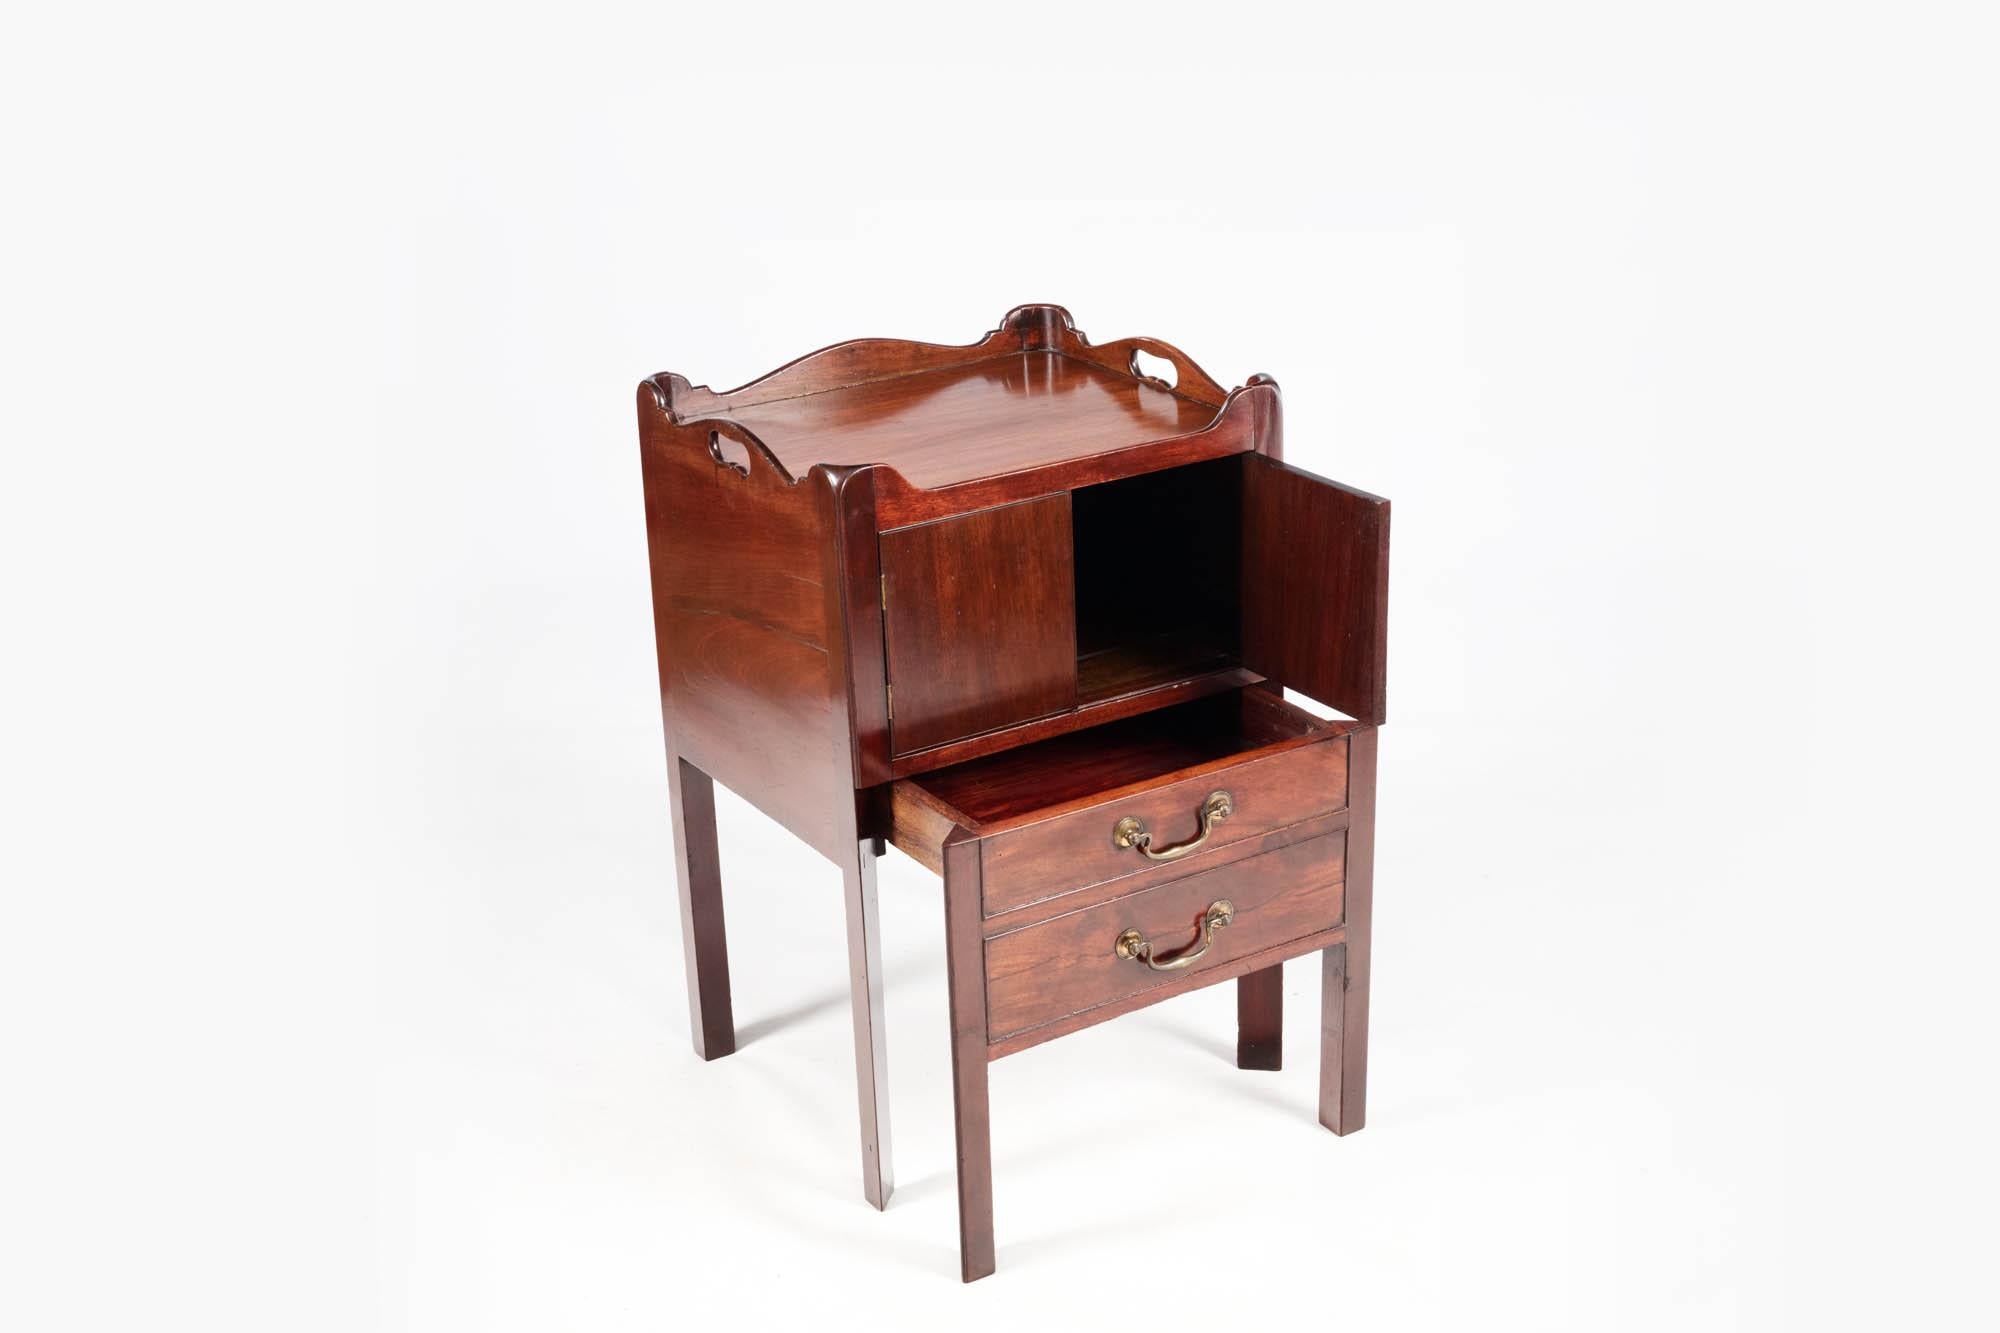 19th Century George III mahogany commode with tray top and brass handles. Of the late Georgian period, this mahogany commode features a scalloped-edge gallery top with pierced handles and two cupboard doors above a deep pull-out drawer, which was